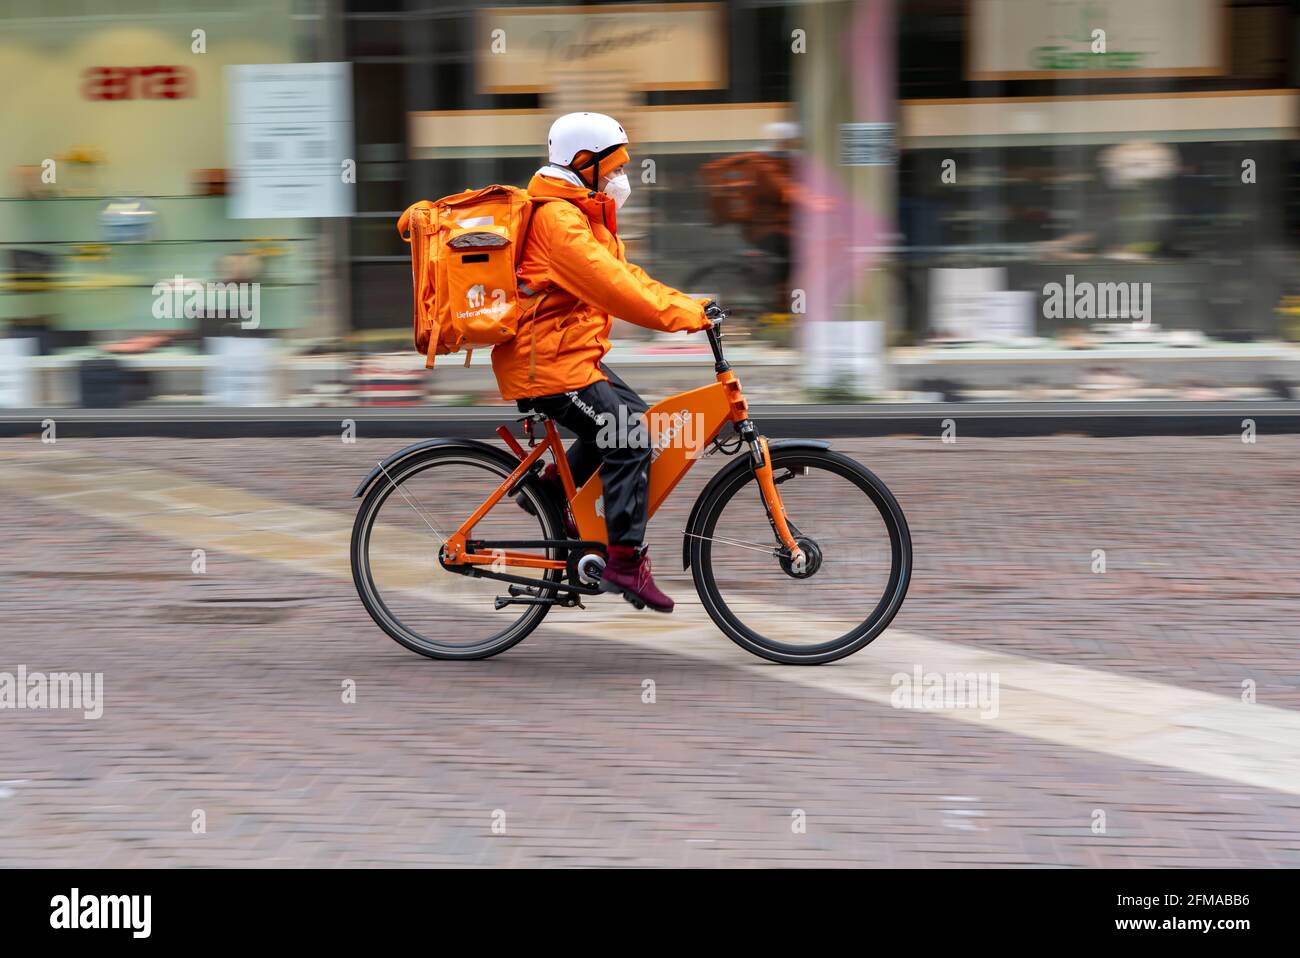 Delivery service Lieferando.de, delivery messenger with companies bicycle  in the city centre, Rathenaustrasse, in Essen, NRW Germany Stock Photo -  Alamy